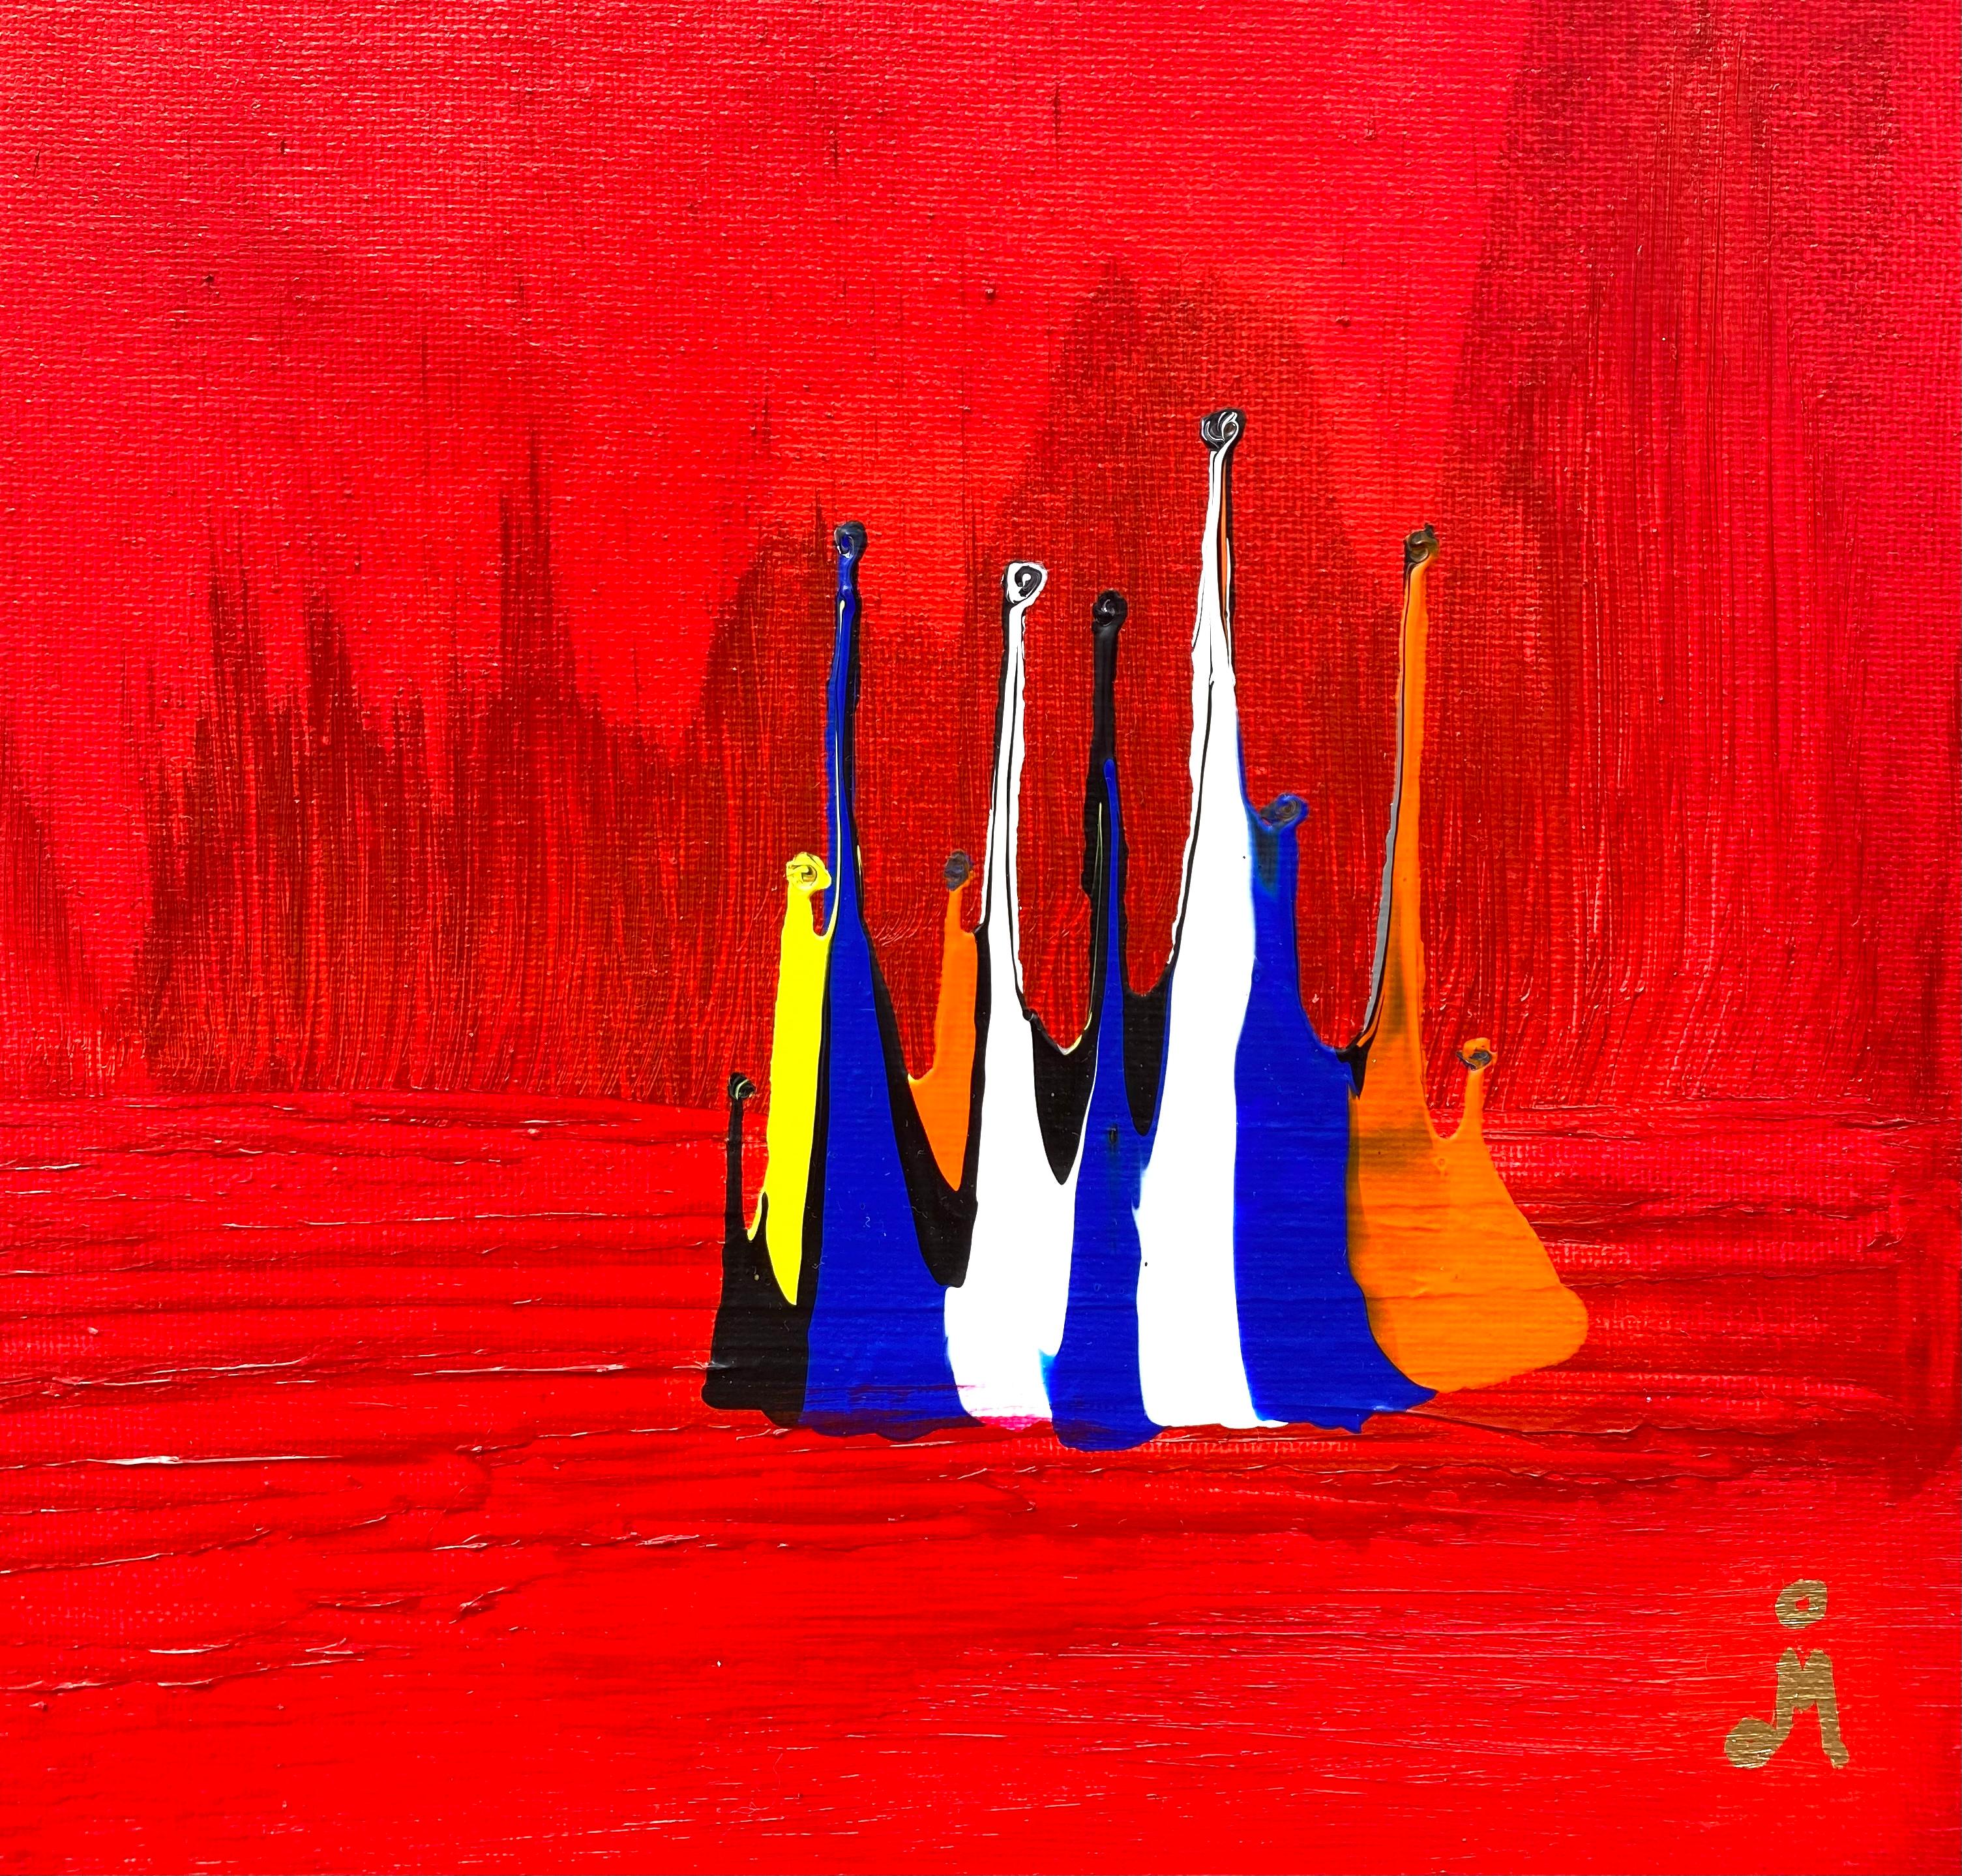 “Children of the World, Red World” - Painting by Oscar Molina